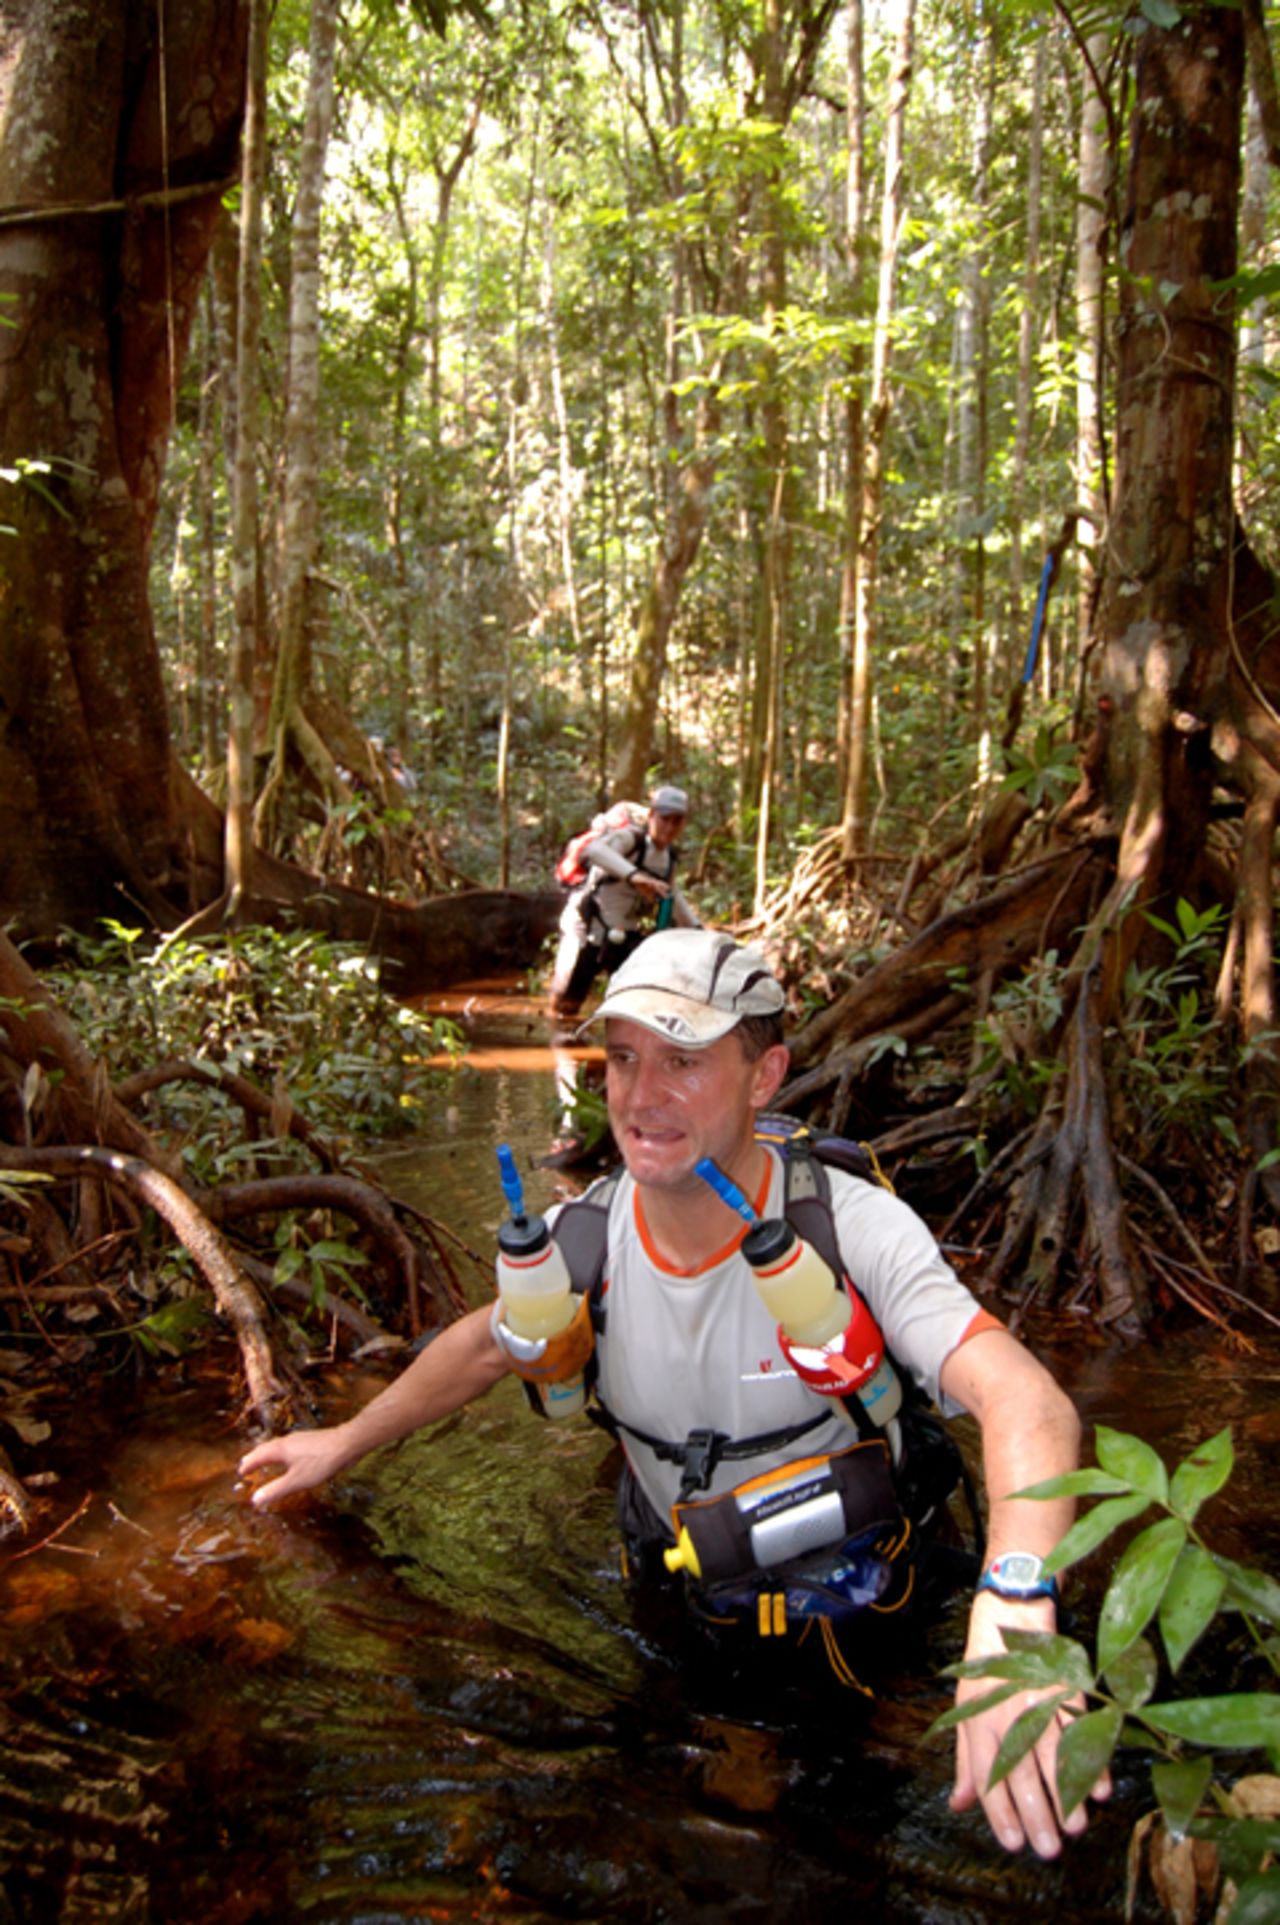 Competitors in Earth in the Jungle Marathon tackle 220km of inhospitable terrain in seven days, battling swamps, poisonous trees and intense heat in the Amazon. Athletes are self-supported to toughen the challenge. 